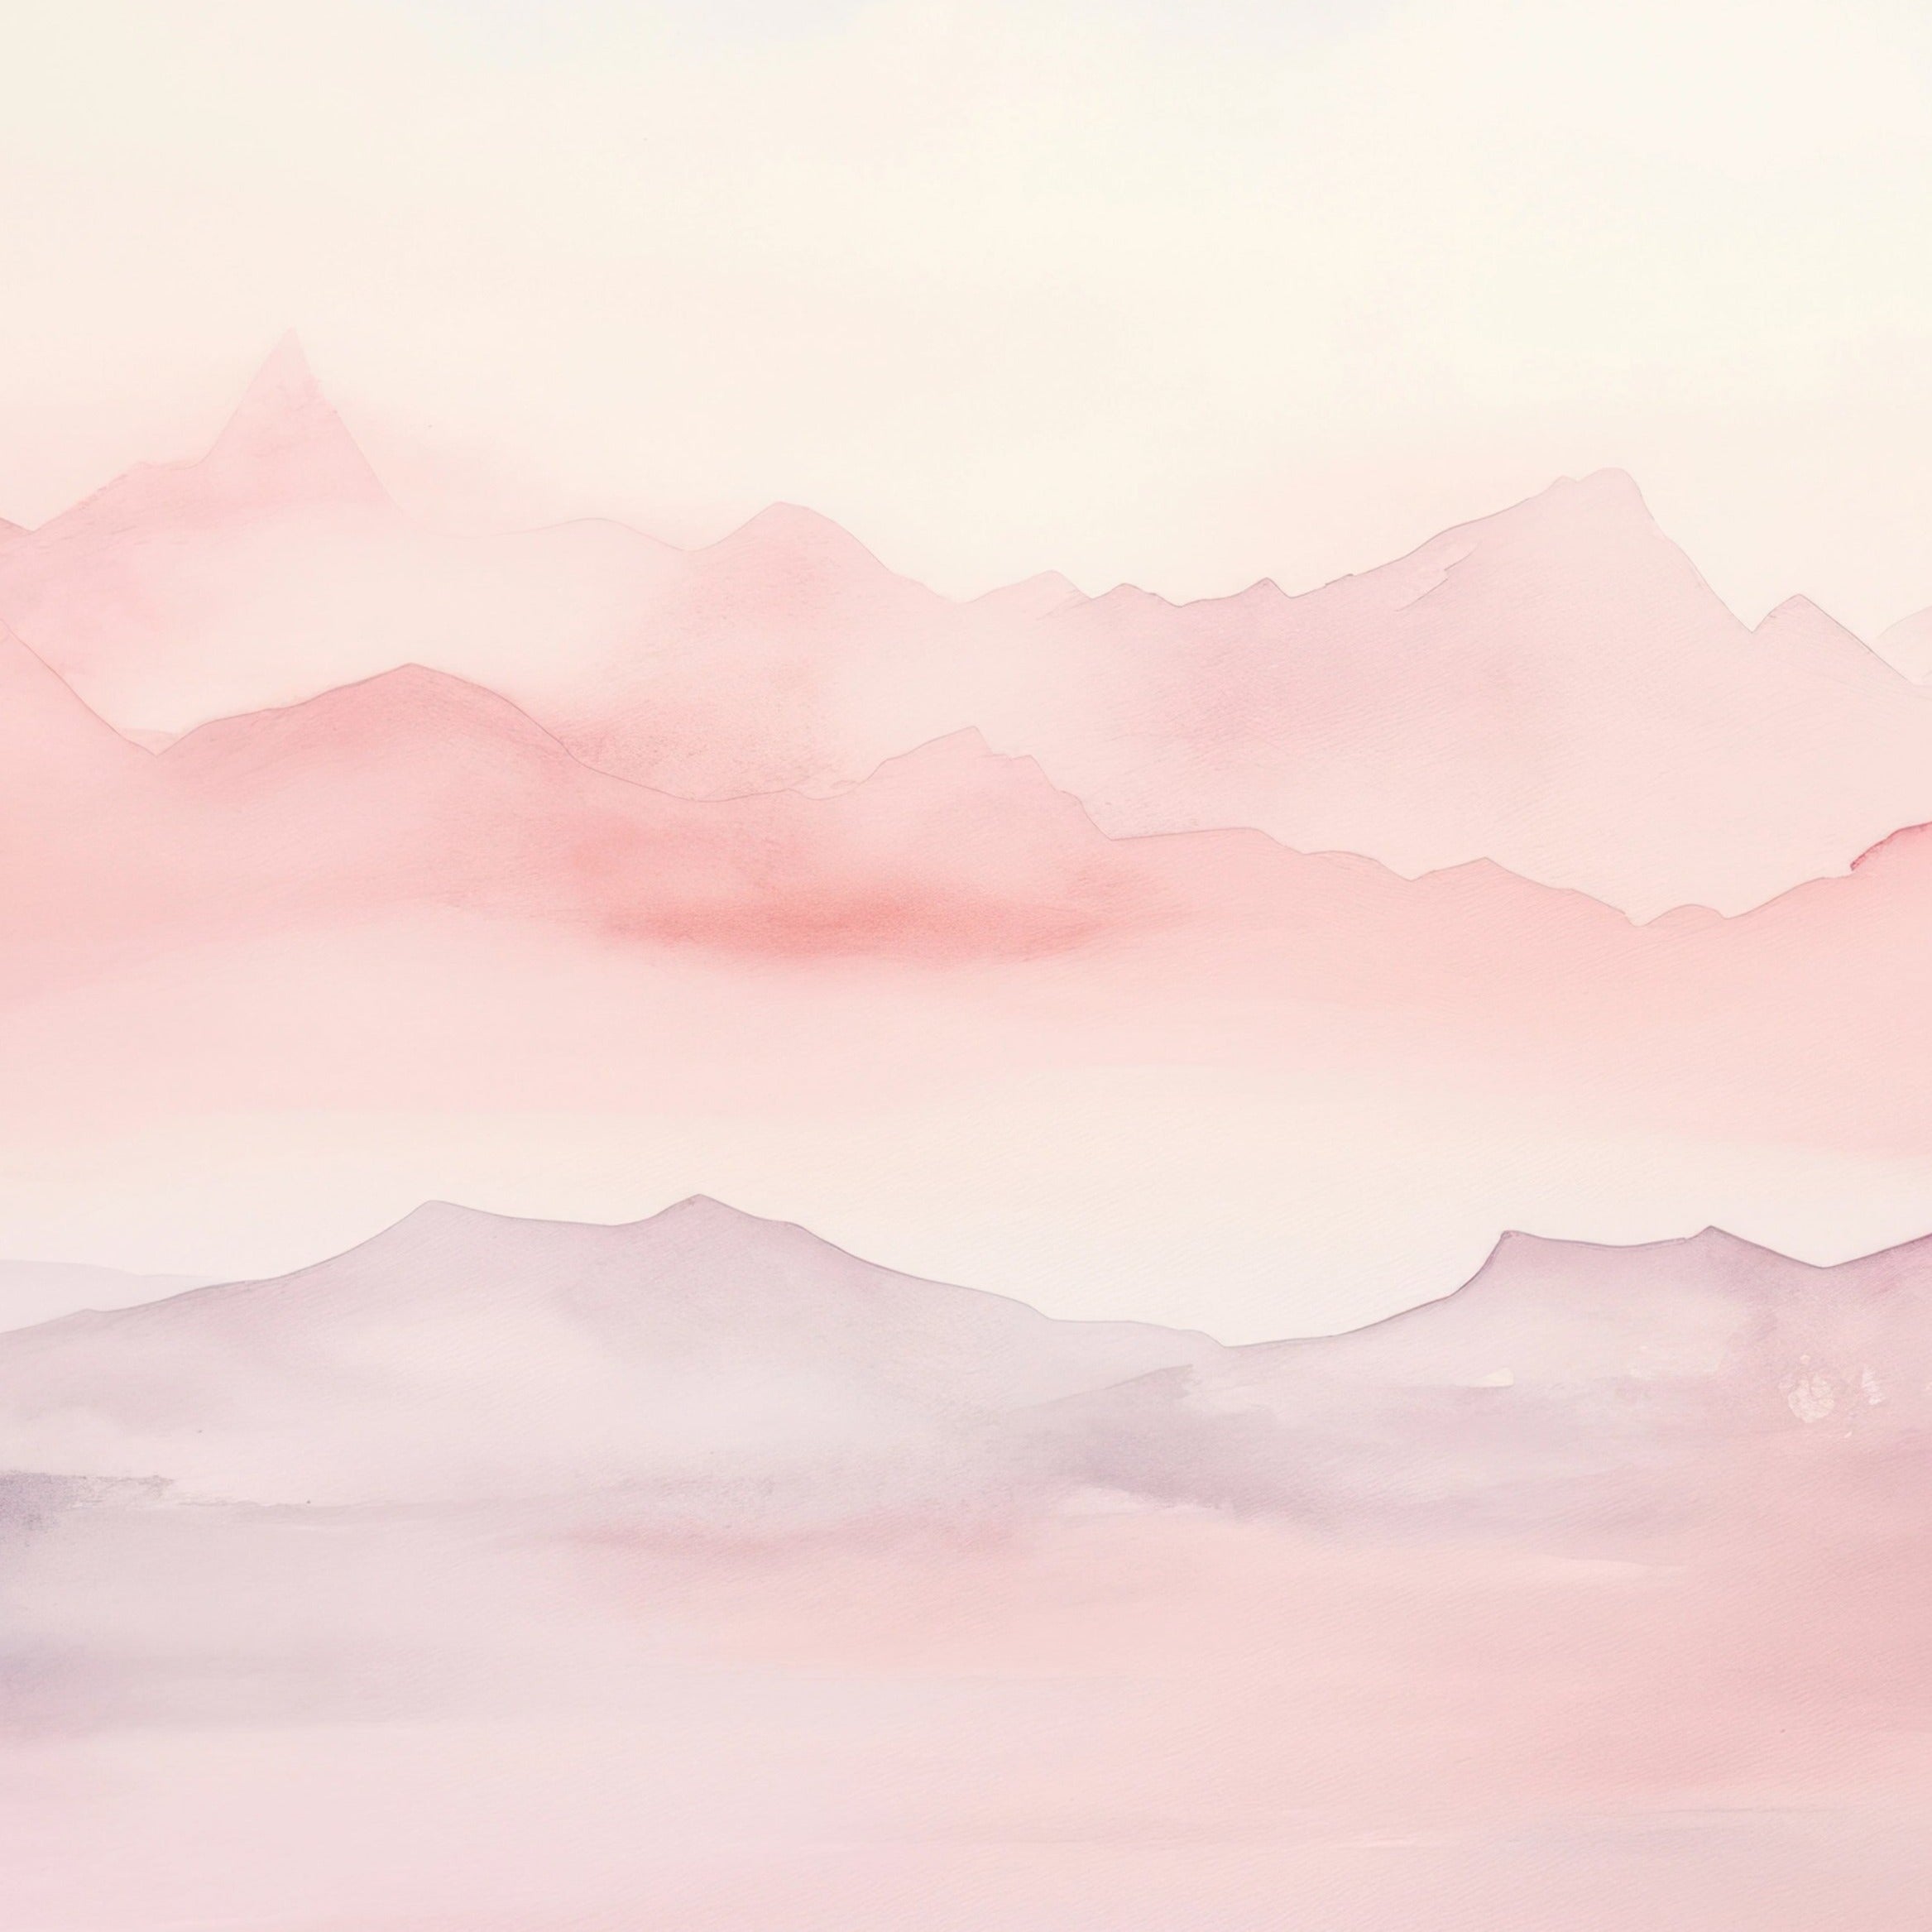 Soft pastel-colored mountain ranges in a mural, showcasing serene pink and gray hues."